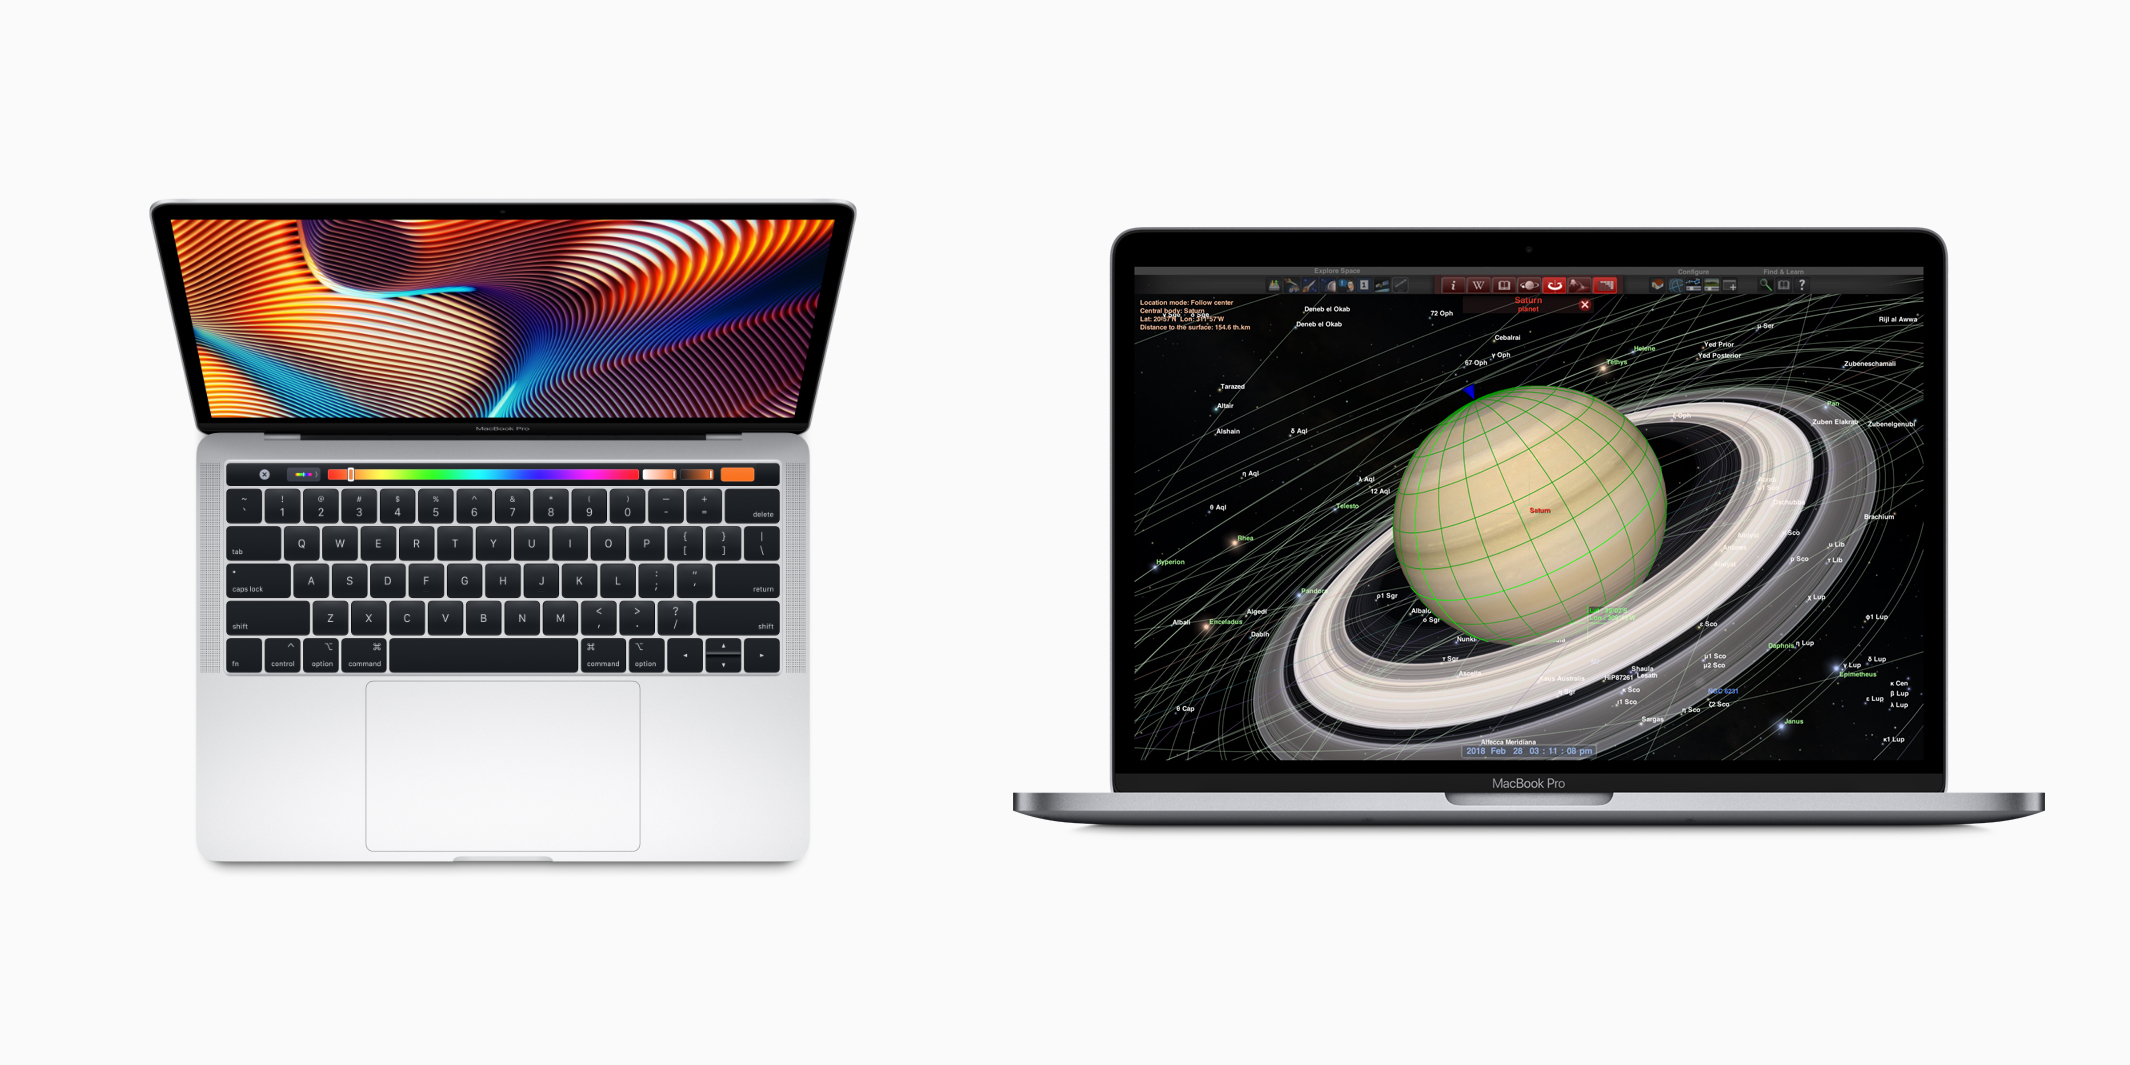 The new 1.4 GHz entry-level MacBook Pro is probably faster than